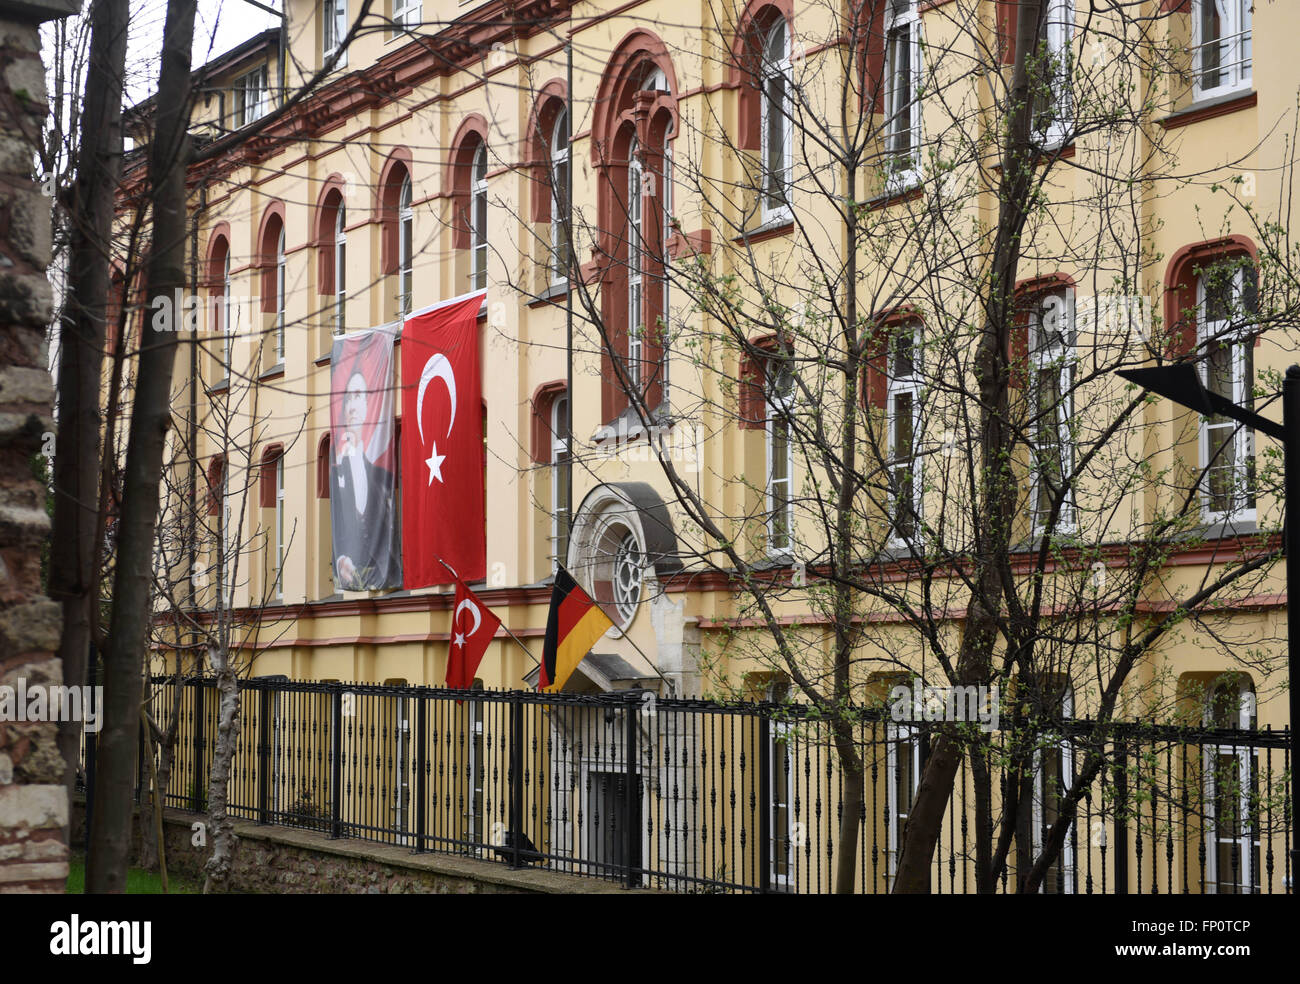 (160317) -- ISTANBUL, March 17, 2016(Xinhua) -- Photo taken on March 17, 2016 shows a closed German school in Istanbul, Turkey. Germany on Thursday closed its diplomatic missions and schools in Turkey's capital Ankara and its largest city, Istanbul, citing unspecified security threats. (Xinhua/He Canling) Stock Photo